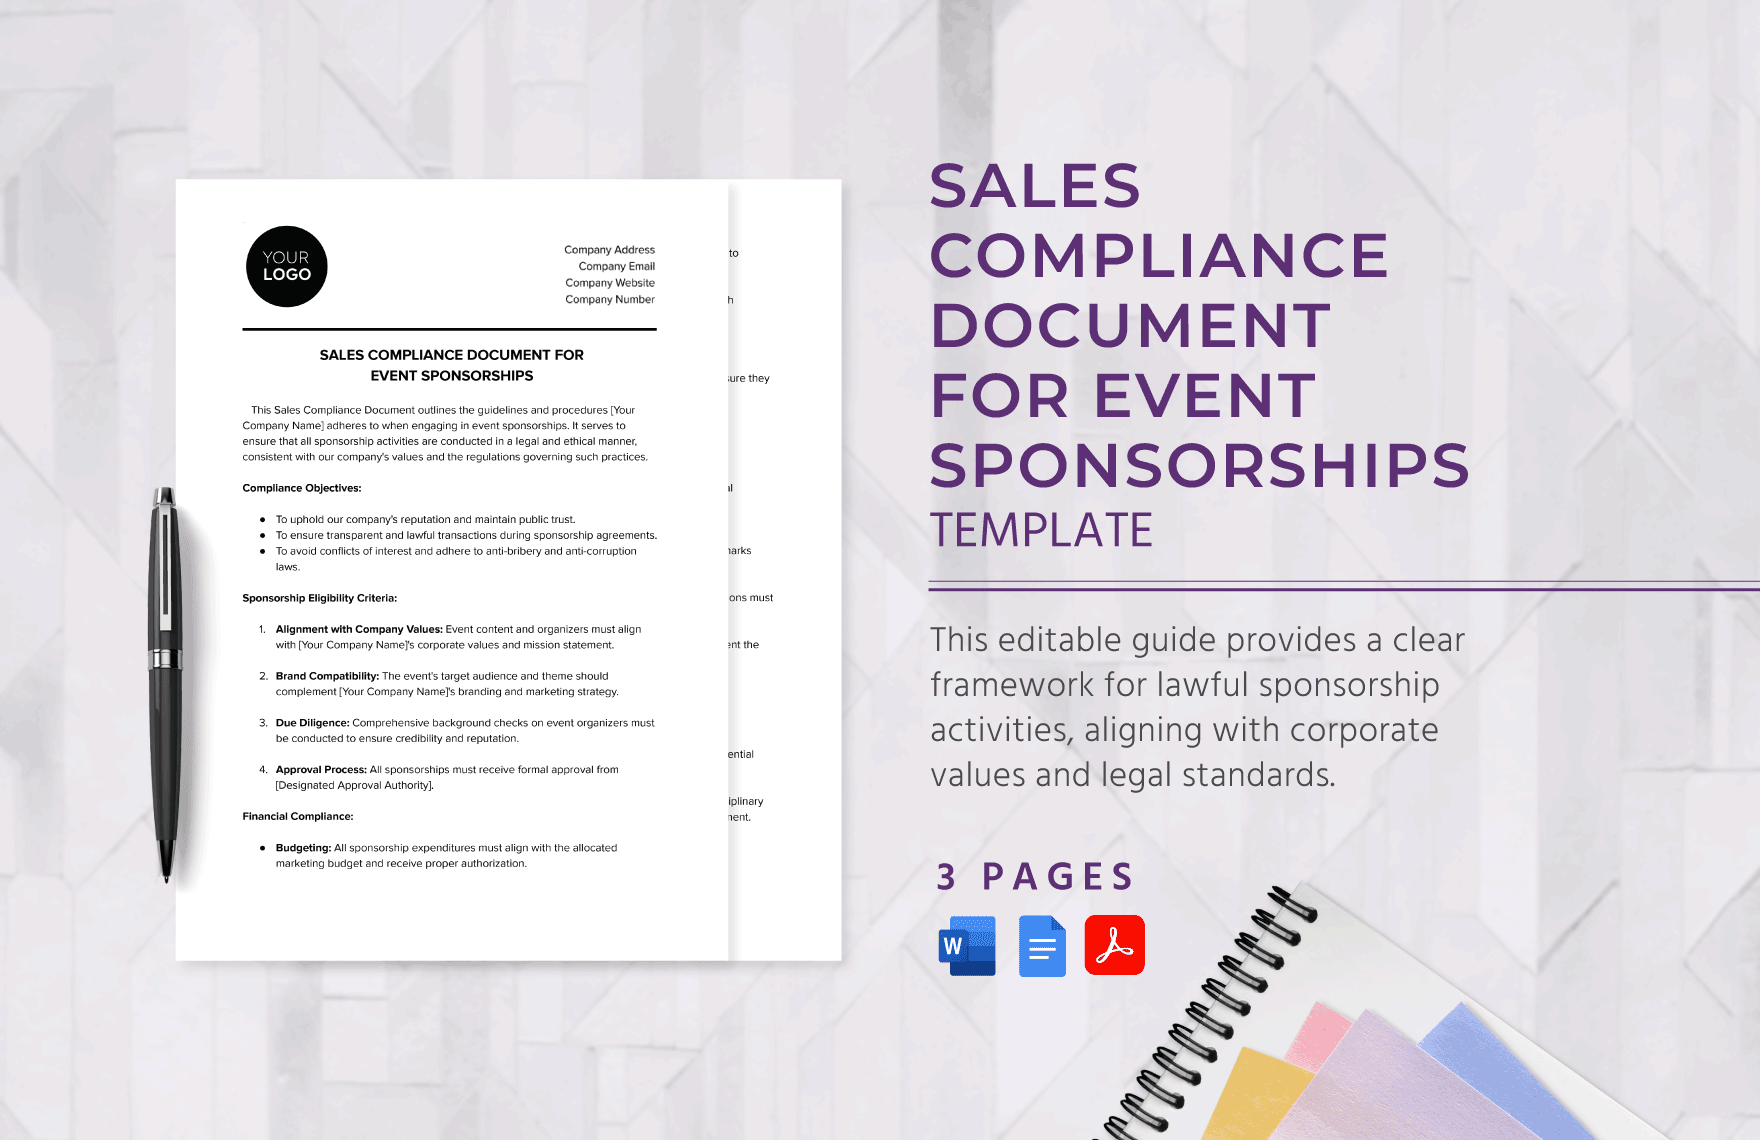 Sales Compliance Document for Event Sponsorships Template in Word, Google Docs, PDF